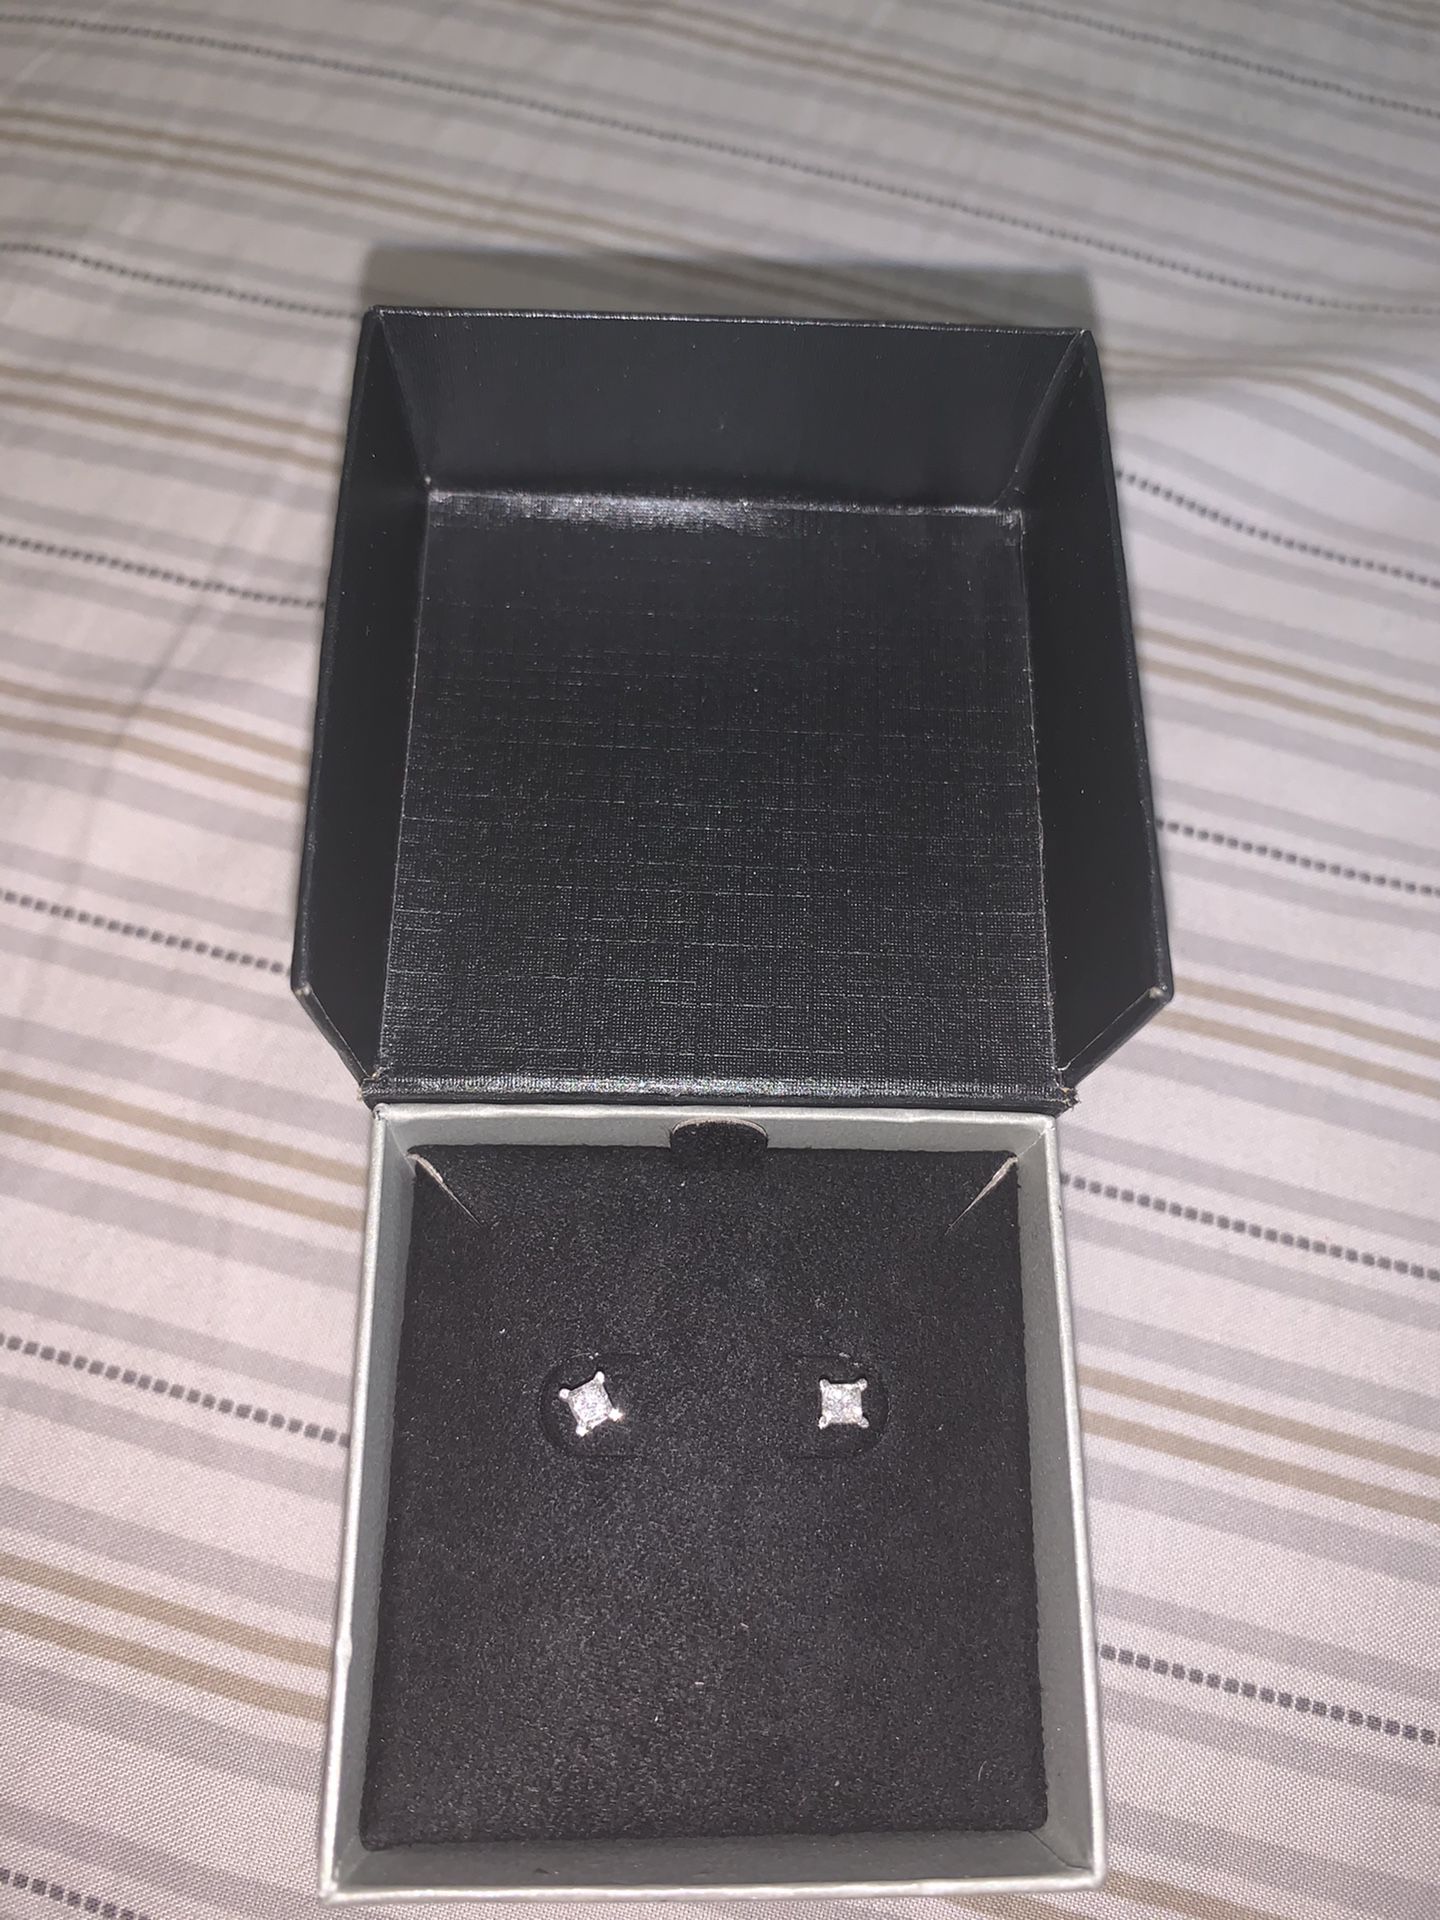 14kt 1/2 real diamond earrings stamped 220$ or best offer come check out